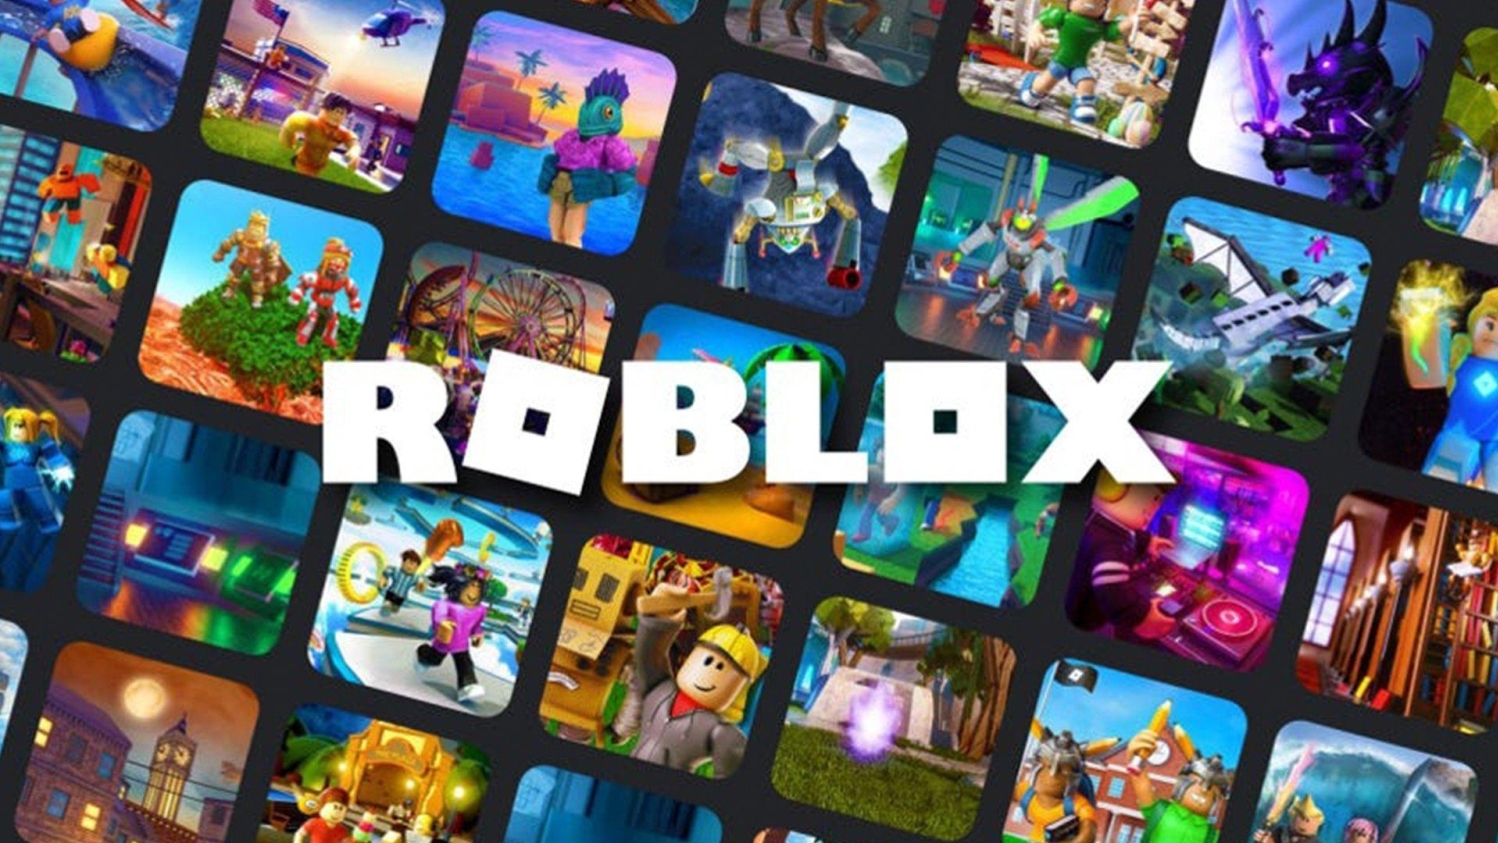 Roblox is now on PlayStation; Know how to play it on PS4 and PS5